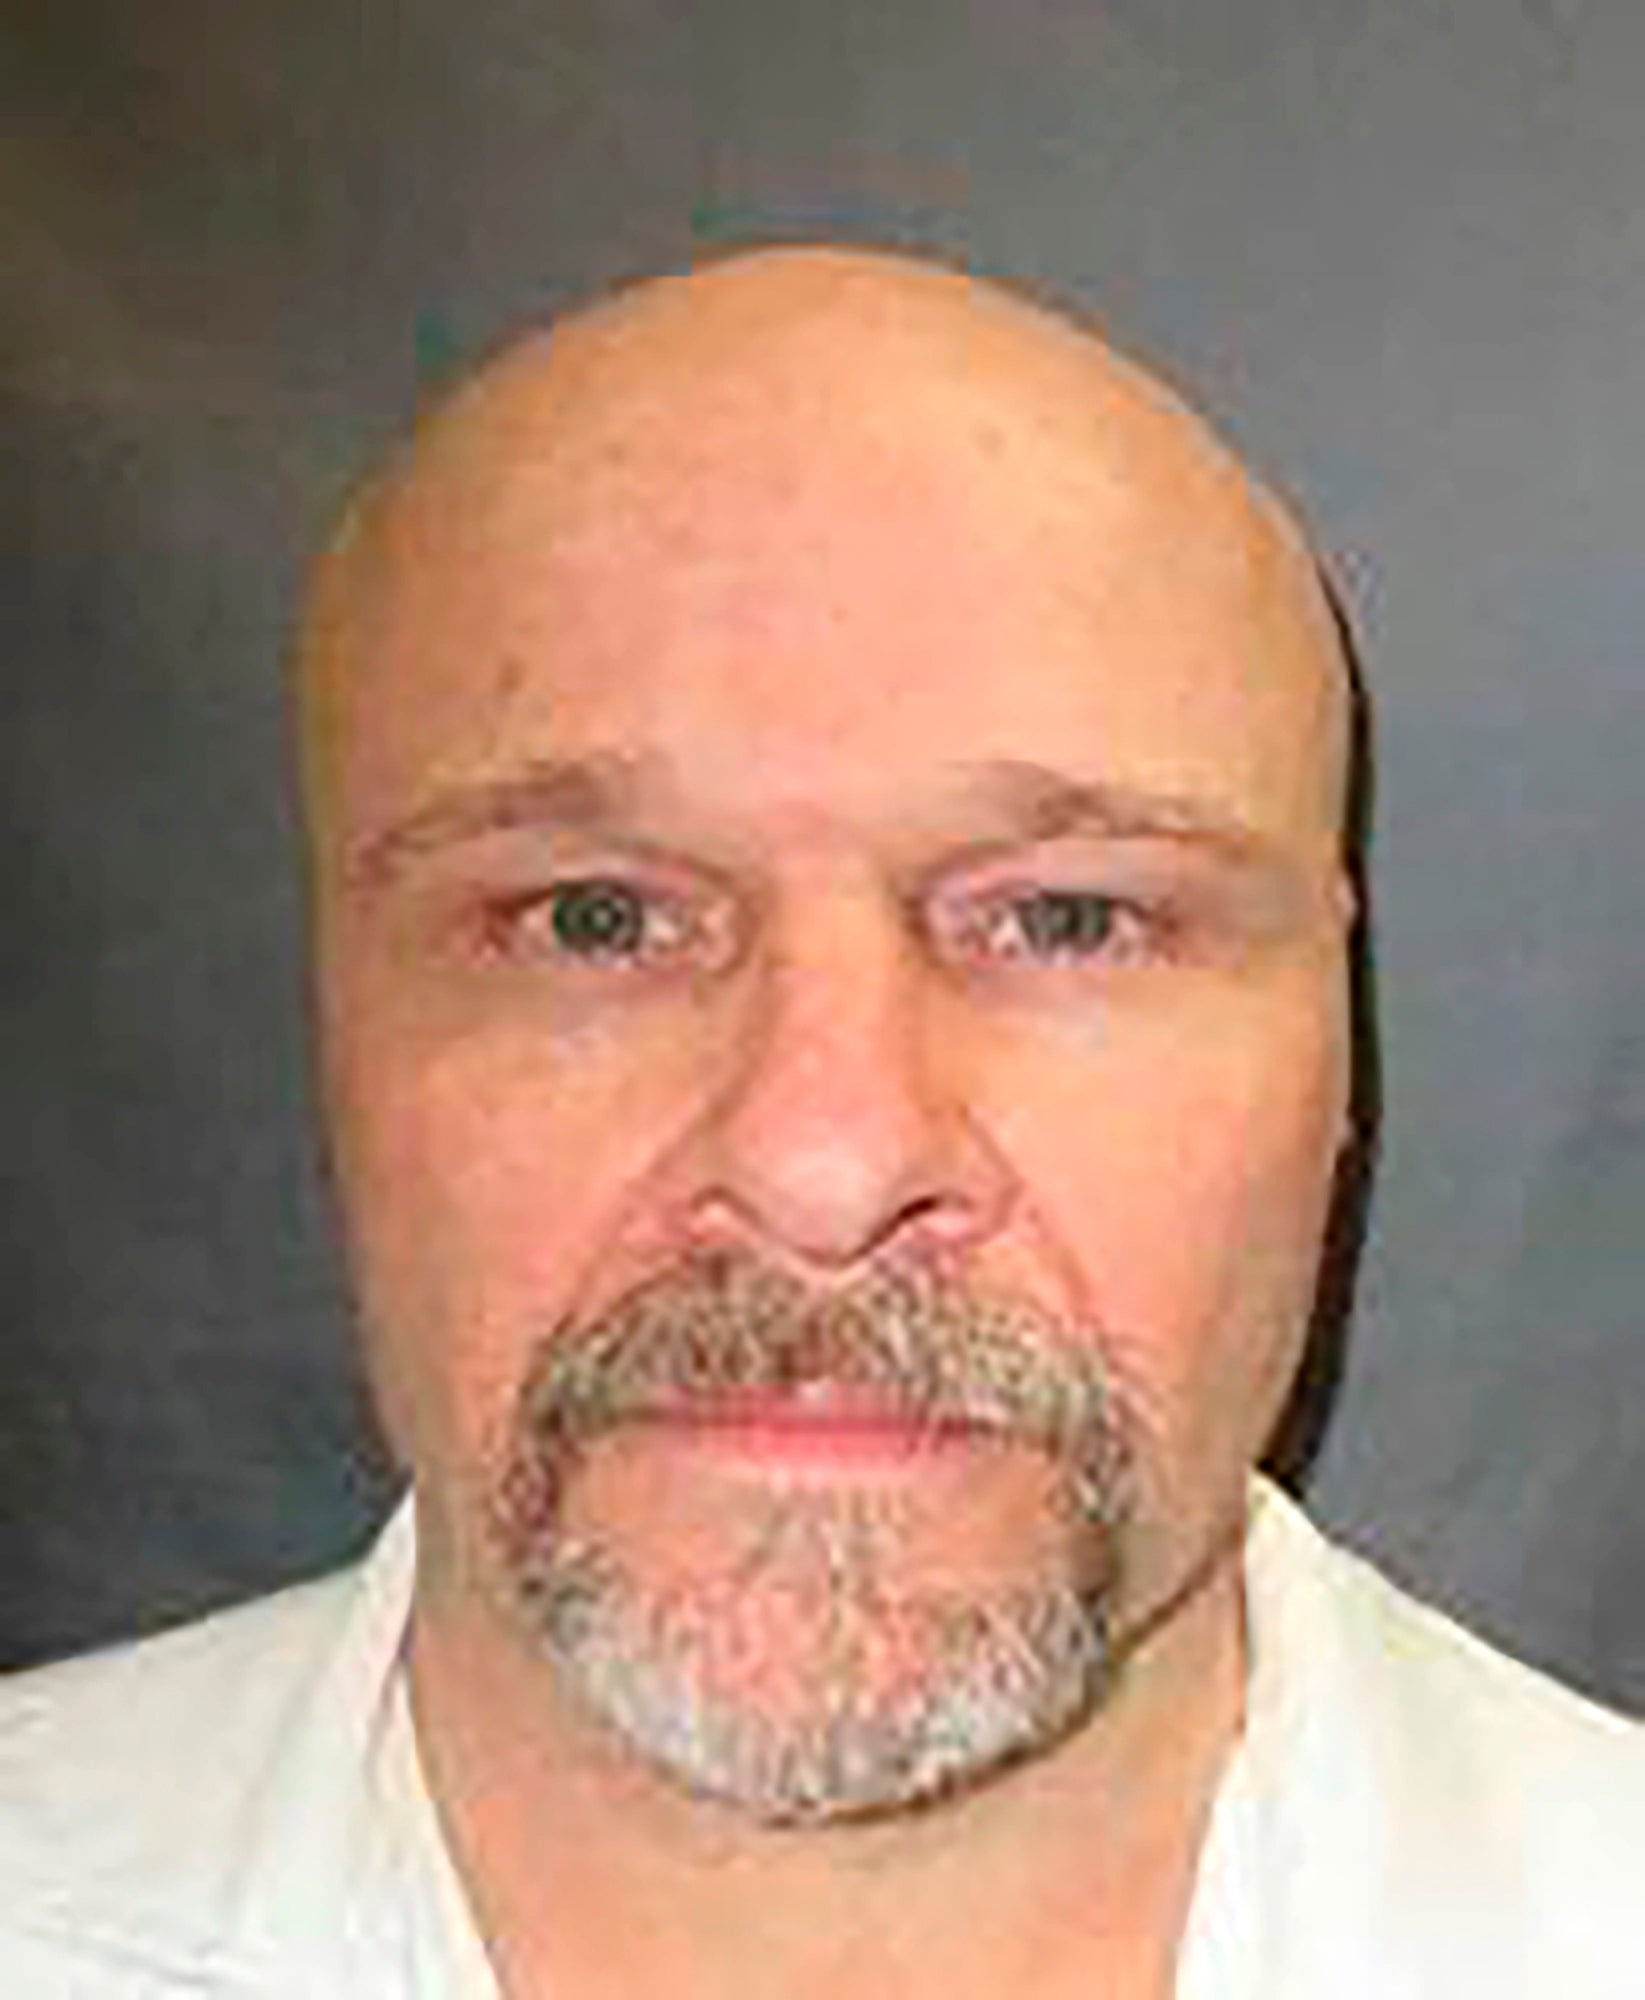 File: Rick Rhoades was sentenced to death for the murder of two brothers in 1991